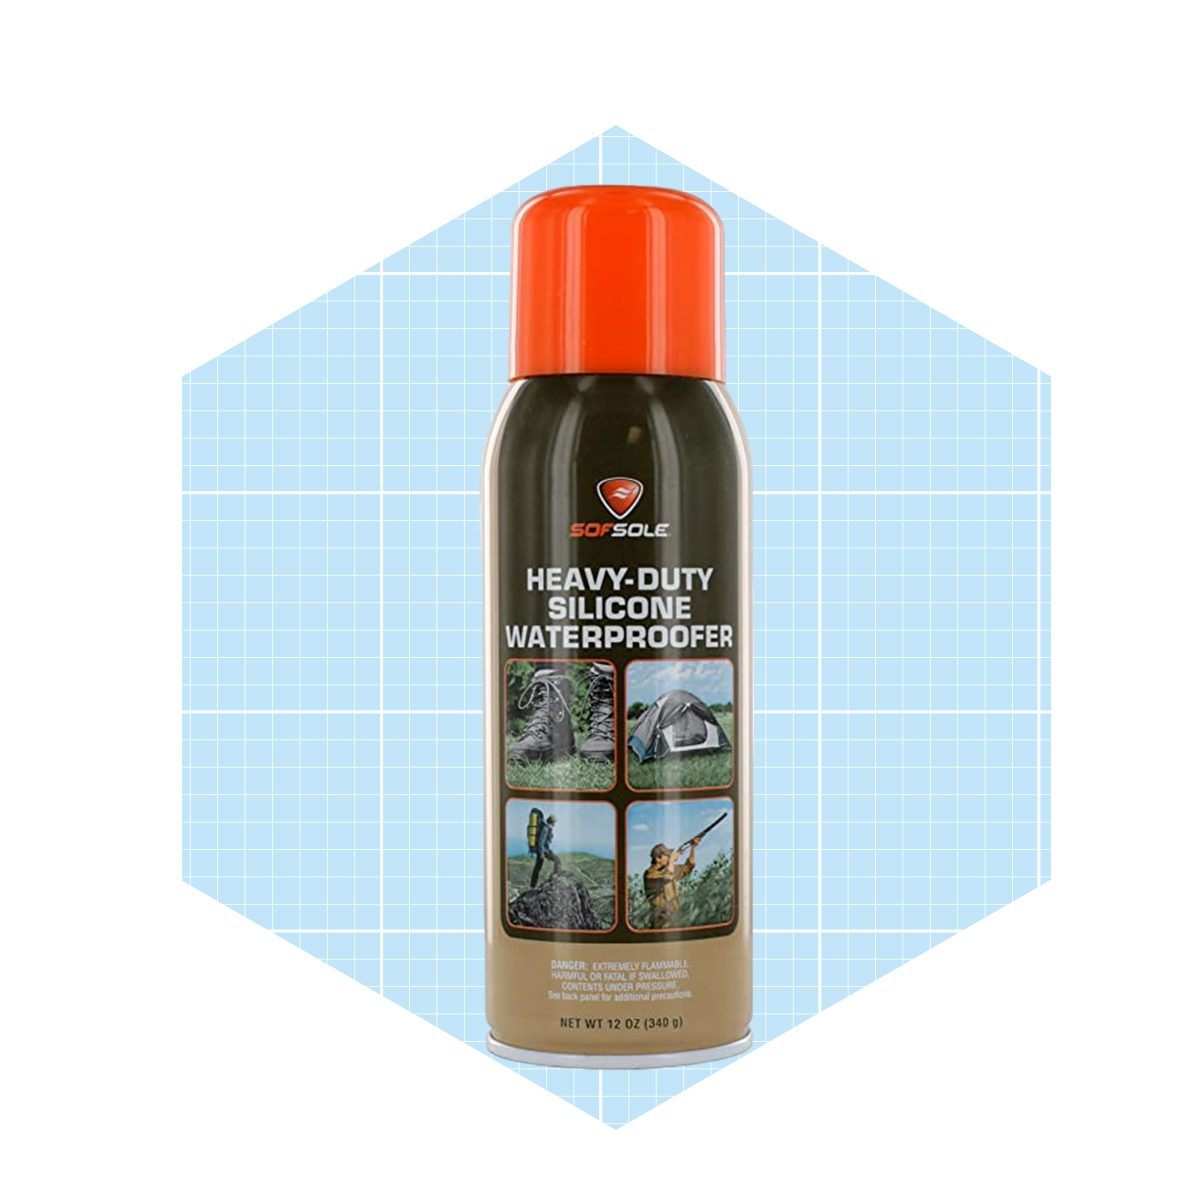 customized waterproof spray for the outdoor